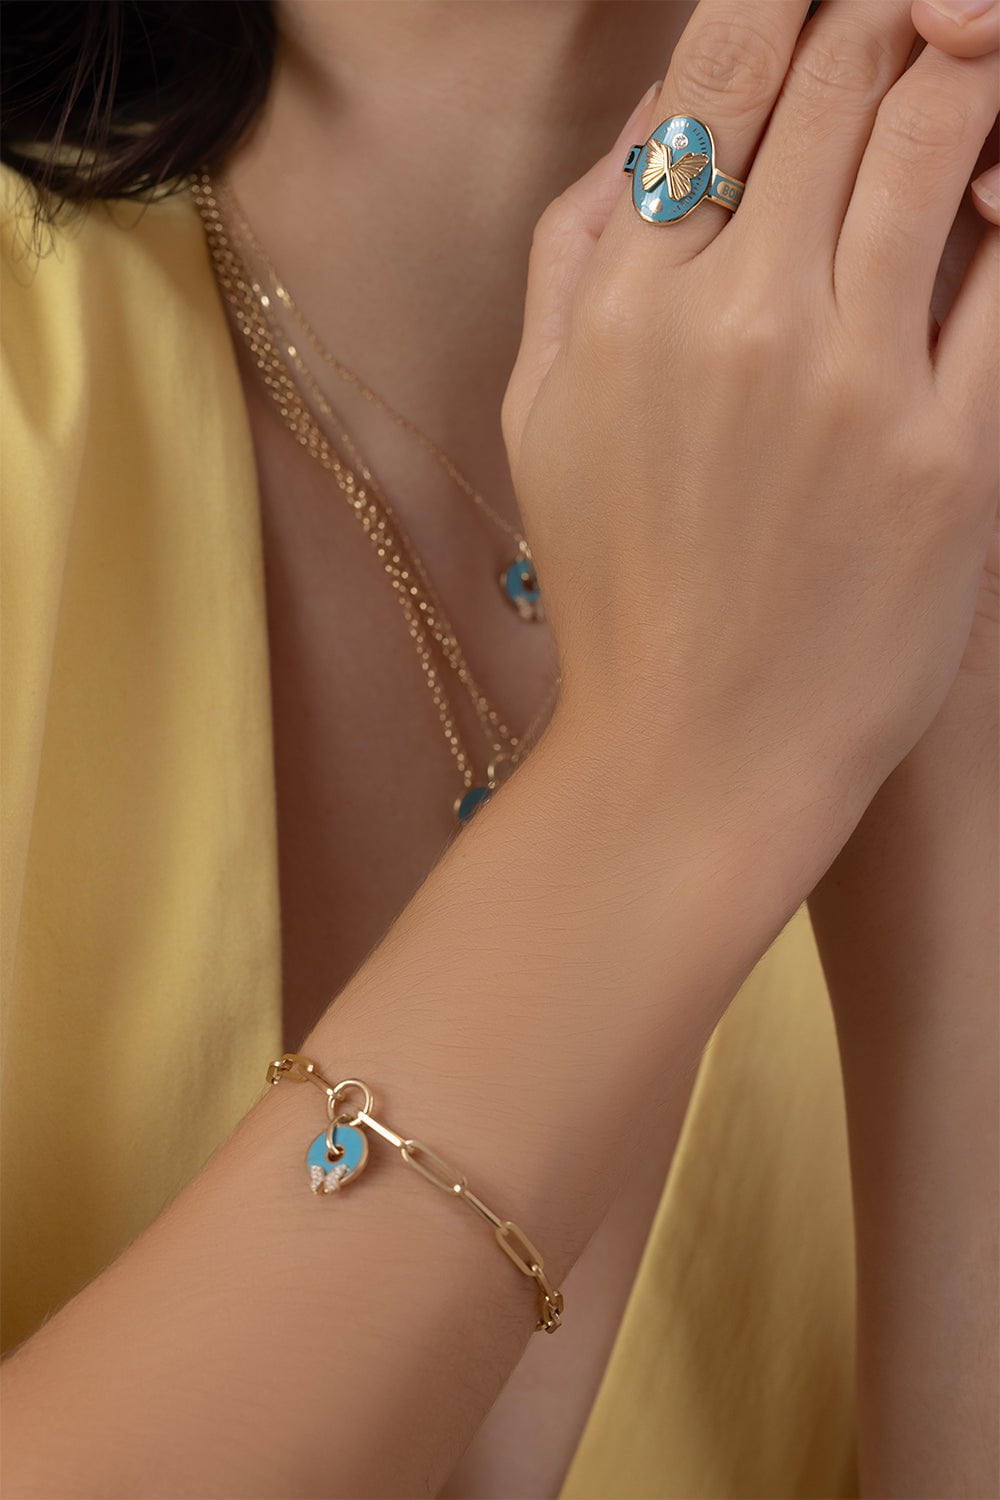 FOUNDRAE-Aqua Butterfly Classic Fob Bracelet - Reverie-YELLOW GOLD